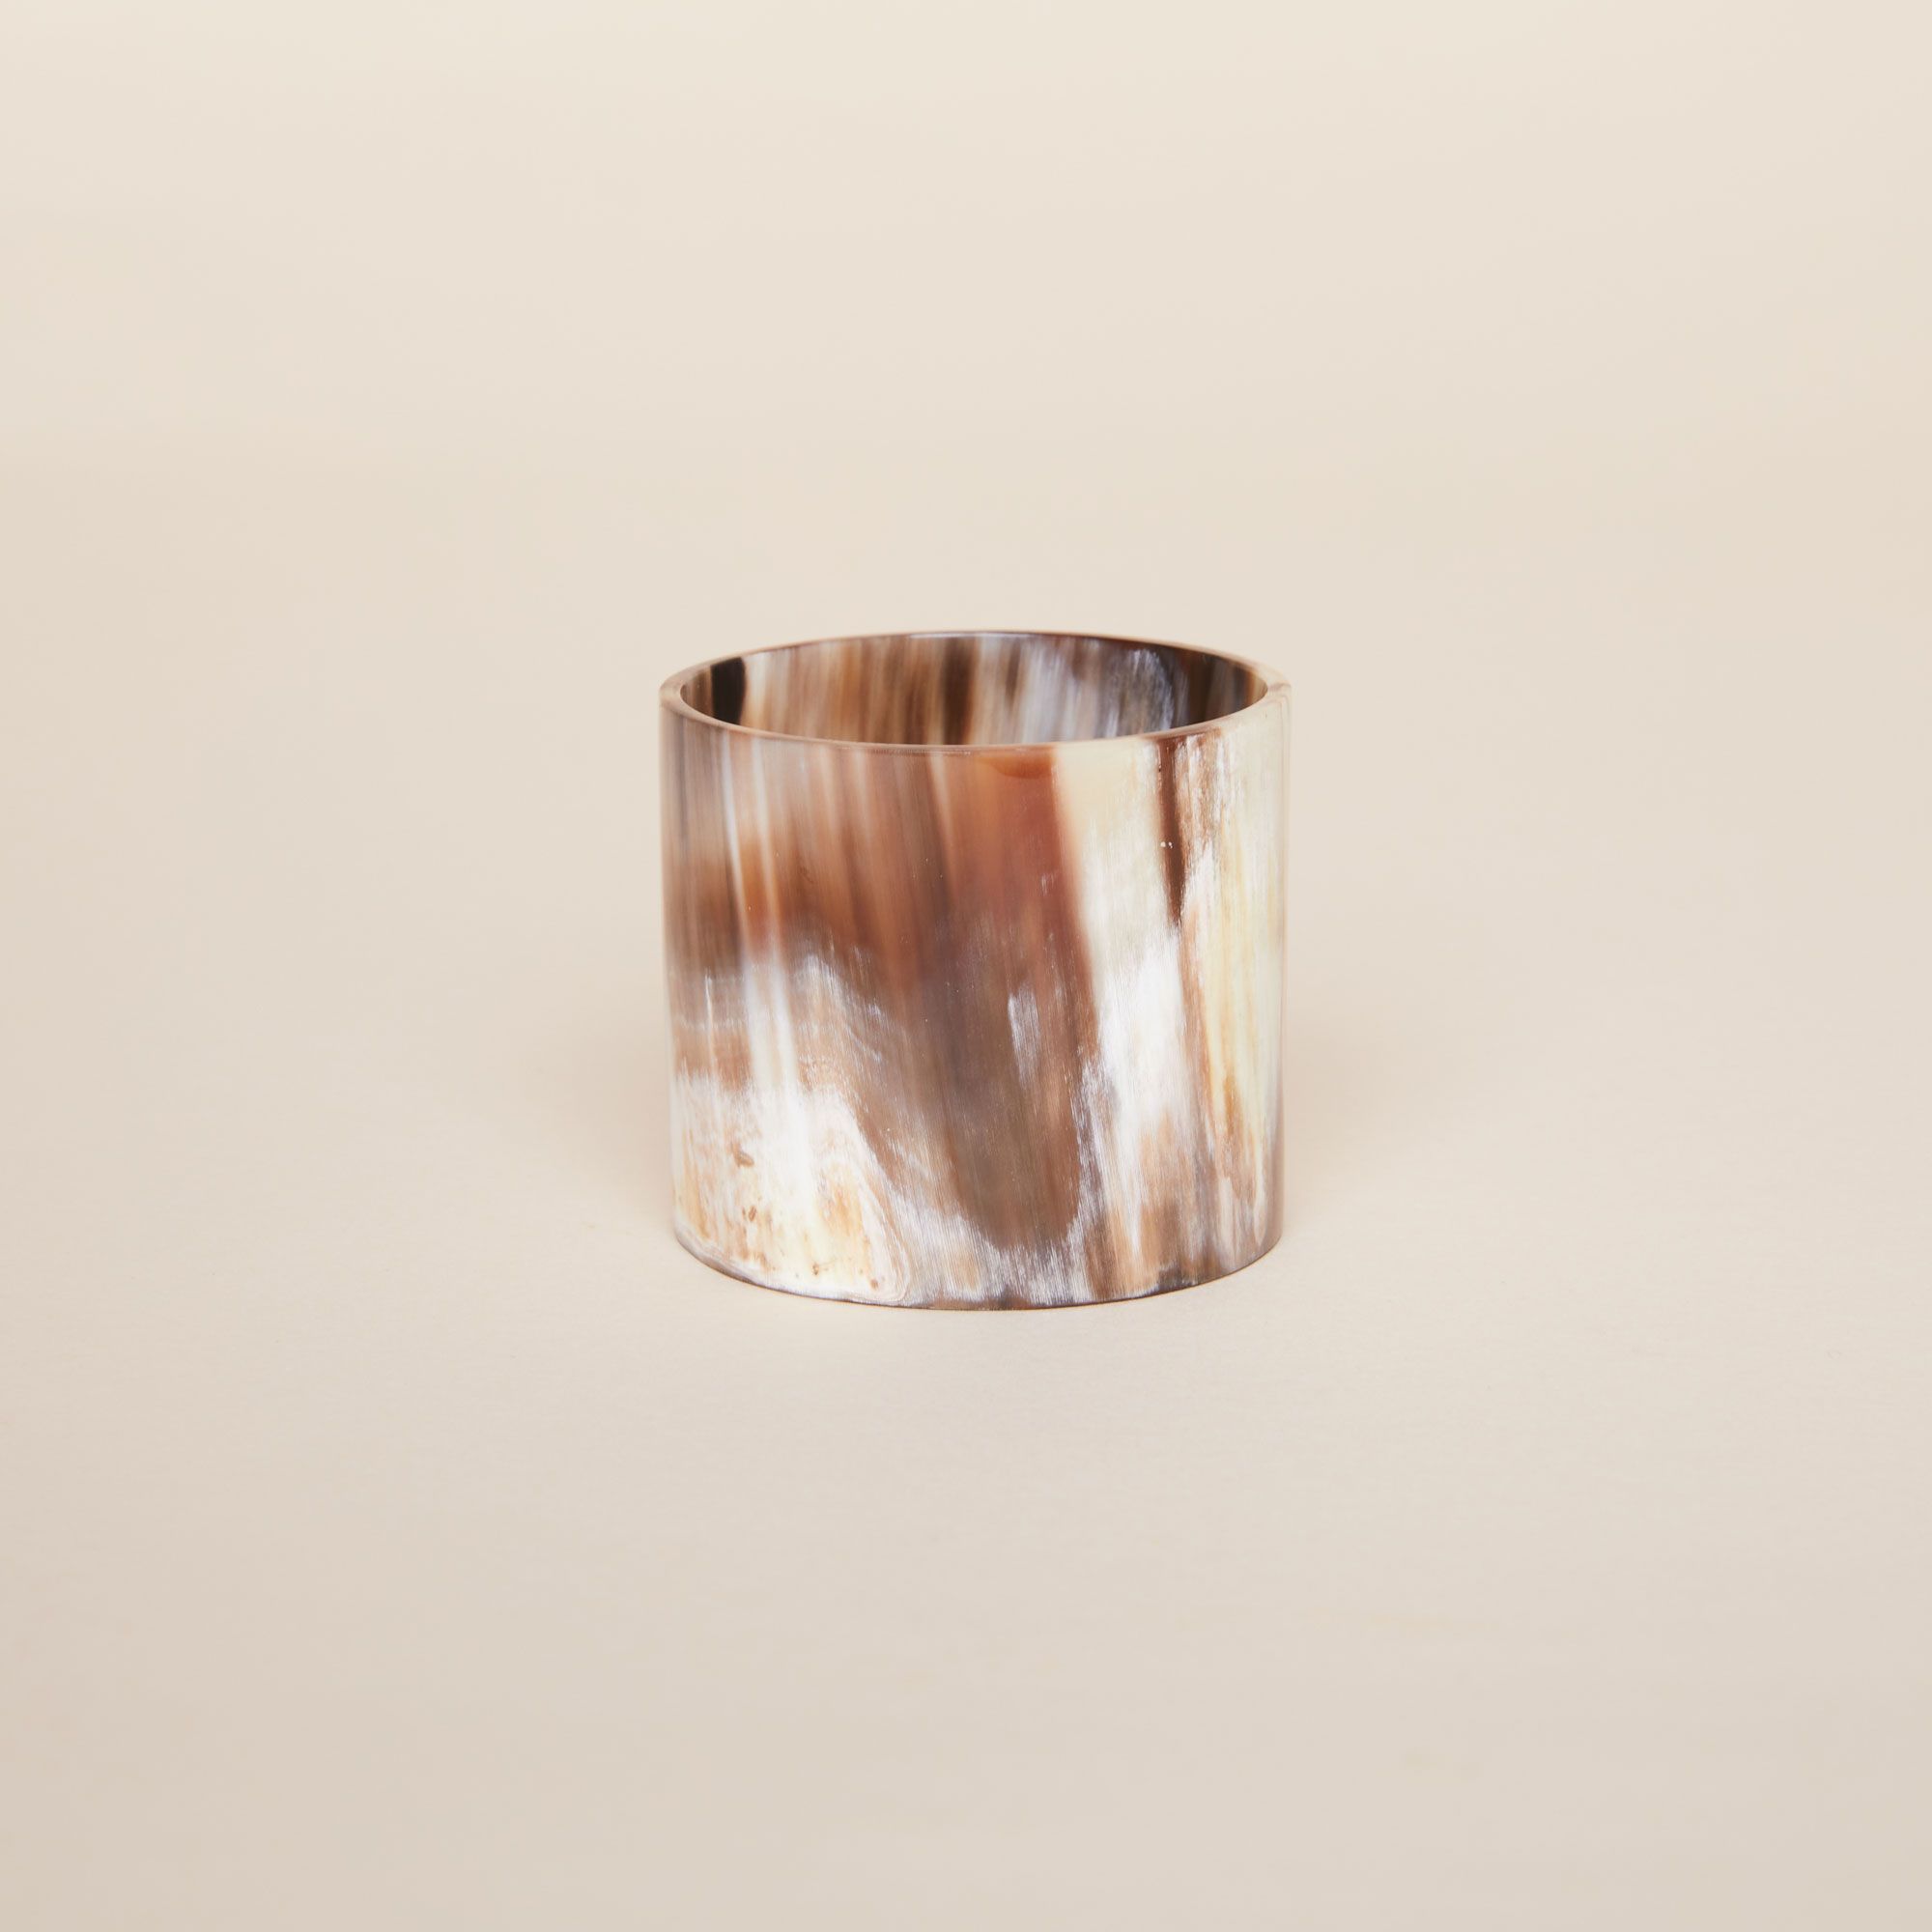 One cylindrical napkin ring in shiny browns, yellows and whites